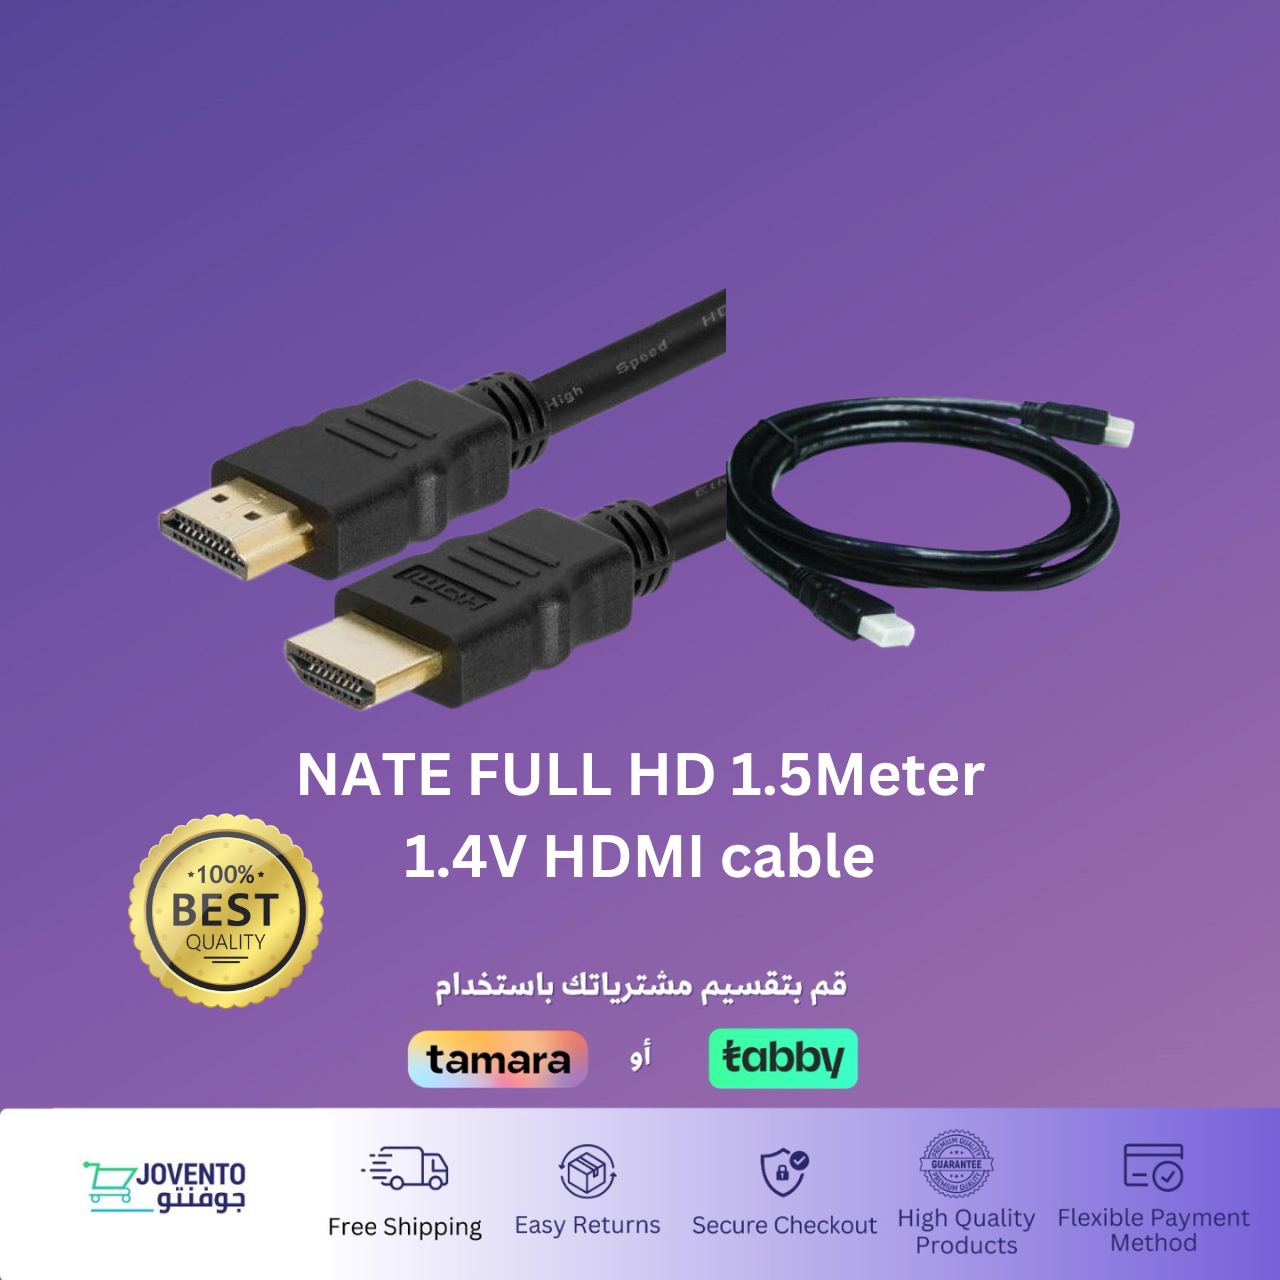 SATROVER 1.5M HDMI Cable -Support FHD 4K 2.0V